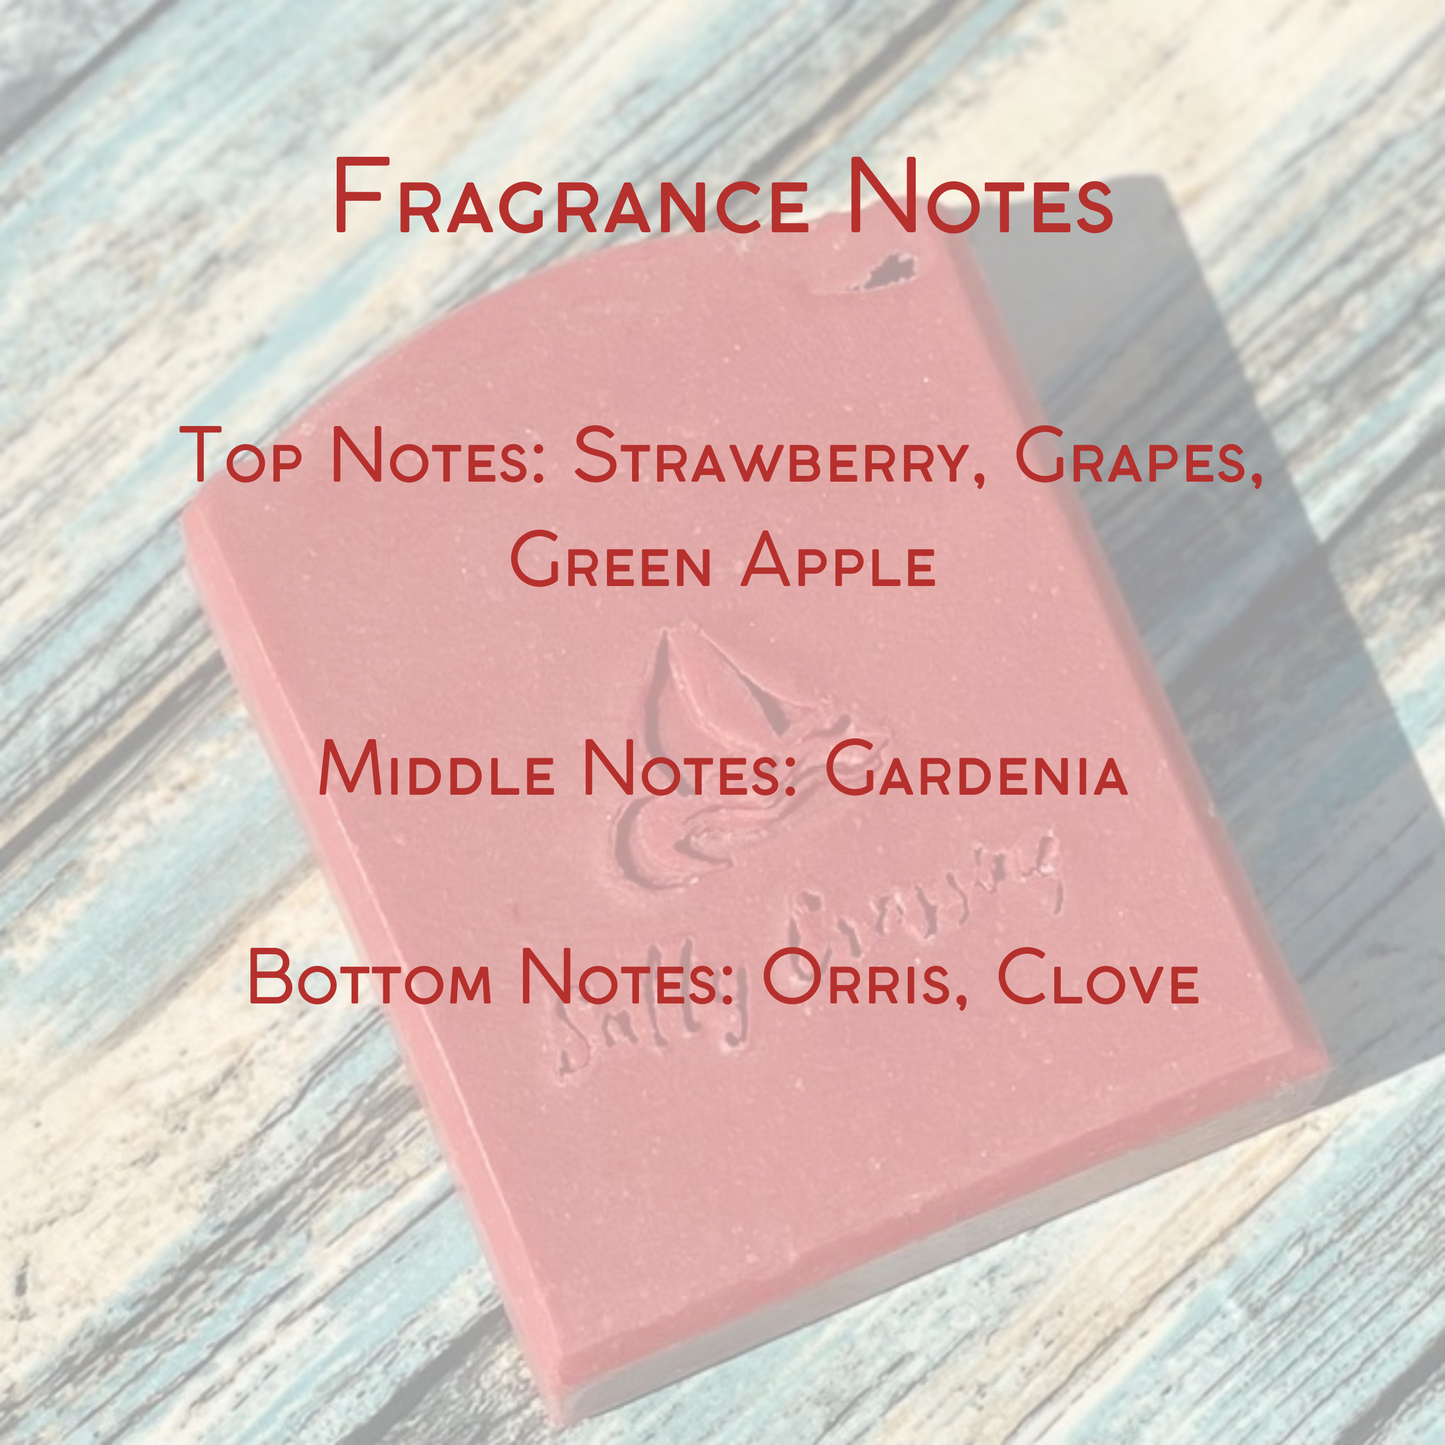 fragrance notes graphic. top notes strawberry, grapes, green apple. middle notes gardenia. bottom notes orris and clove.